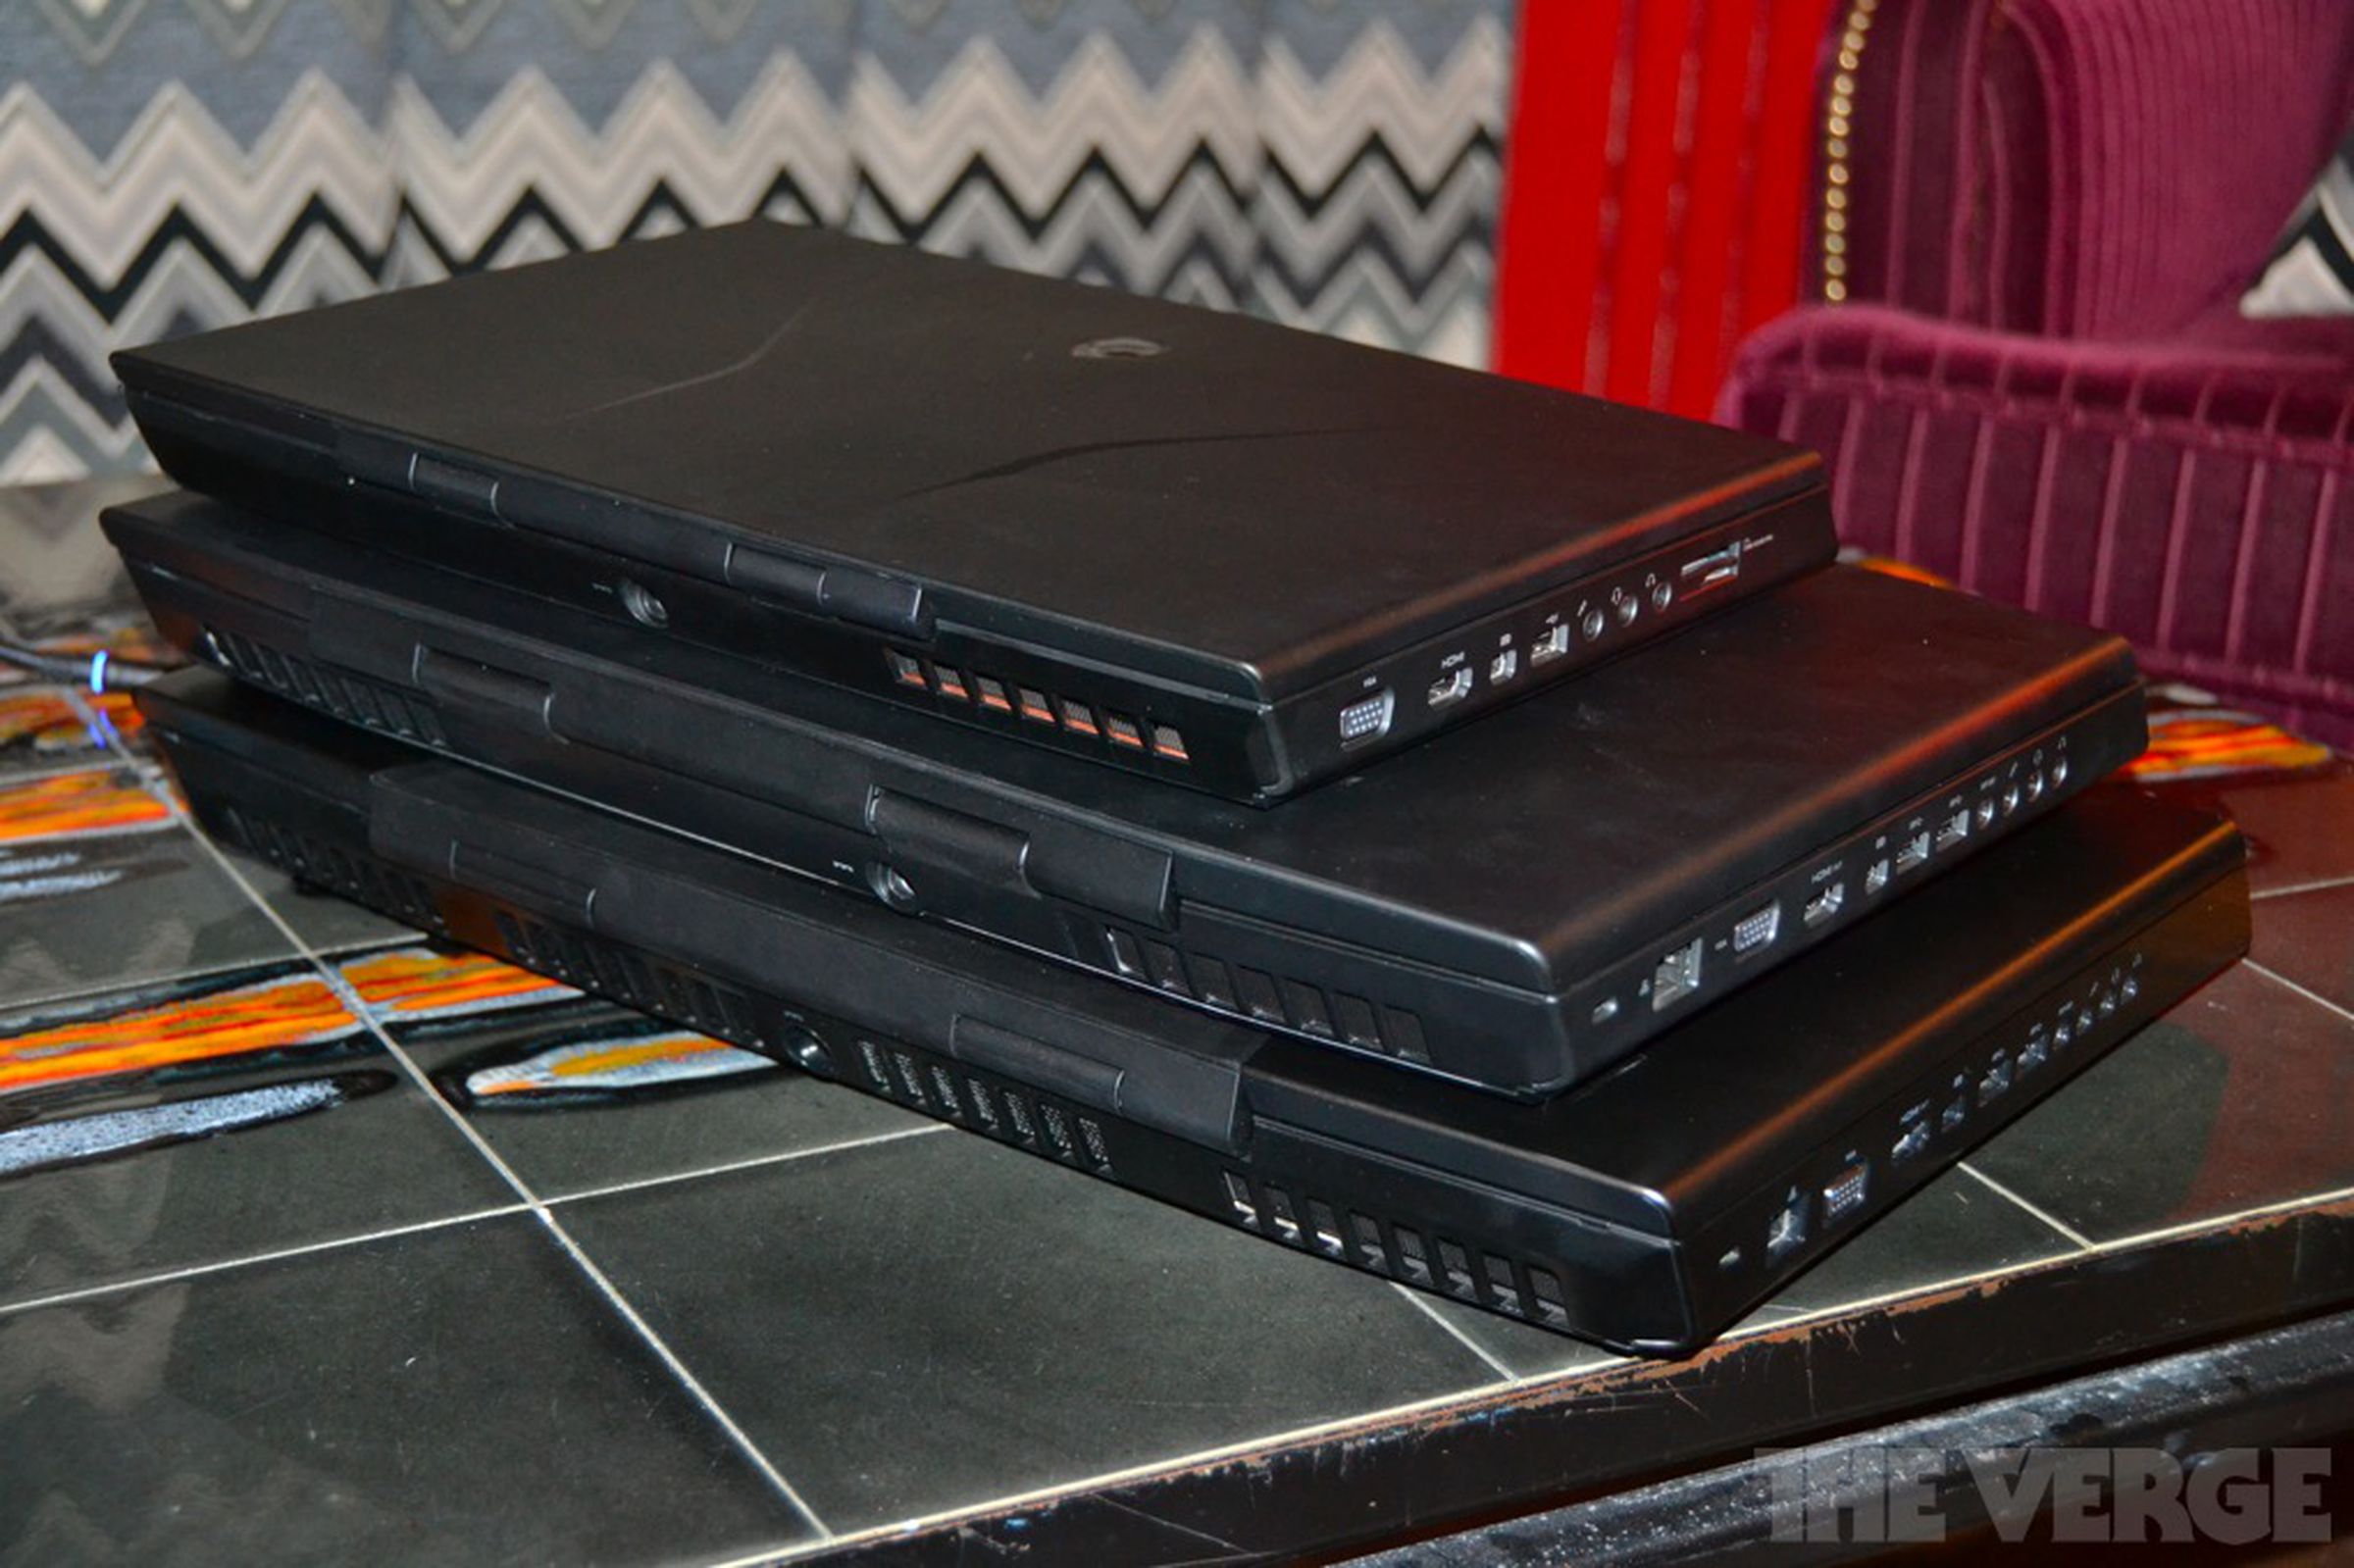 Alienware M14x, M17x and M18x 2012 models hands-on pictures